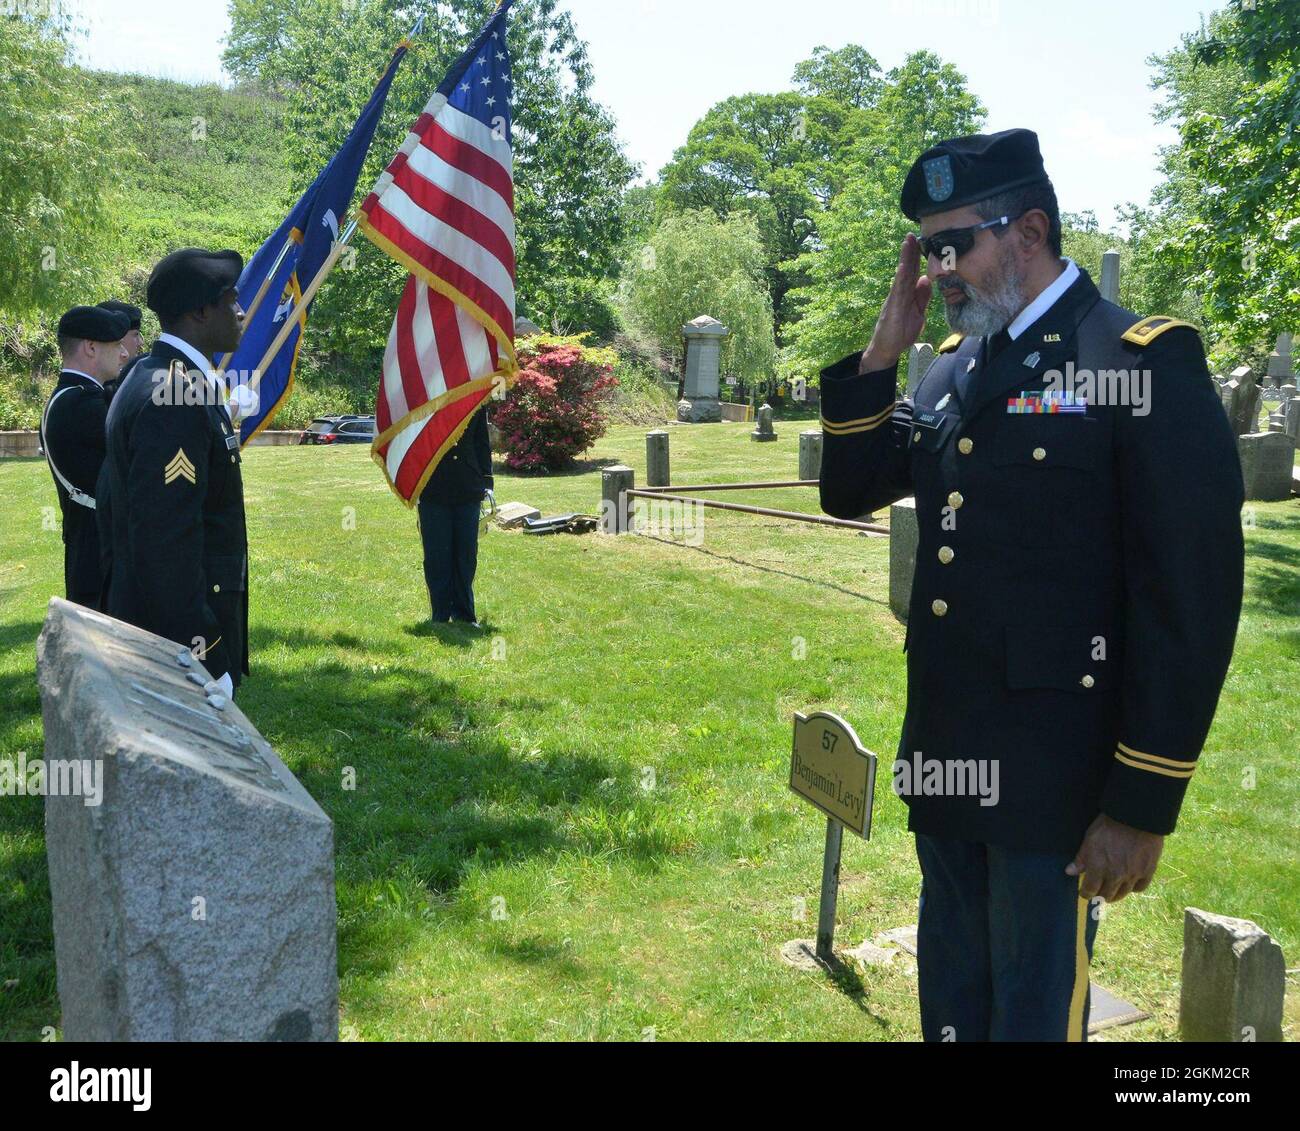 New York Army National Guard Chaplain (Maj.) Raziel Amar renders honors during a remembrance ceremony of Union Sgt. Benjamin Levy, the first Jewish American to receive the Medal of Honor, at his burial site at Cypress Hills Cemetery in Brooklyn, N.Y., May 21, 2021. Levy was a New York Soldier who received the Medal of Honor for his actions to save his regimental colors and rally his unit, the 1st New York Volunteer Infantry Regiment, during the Battle of Glendale in June 1862. Stock Photo